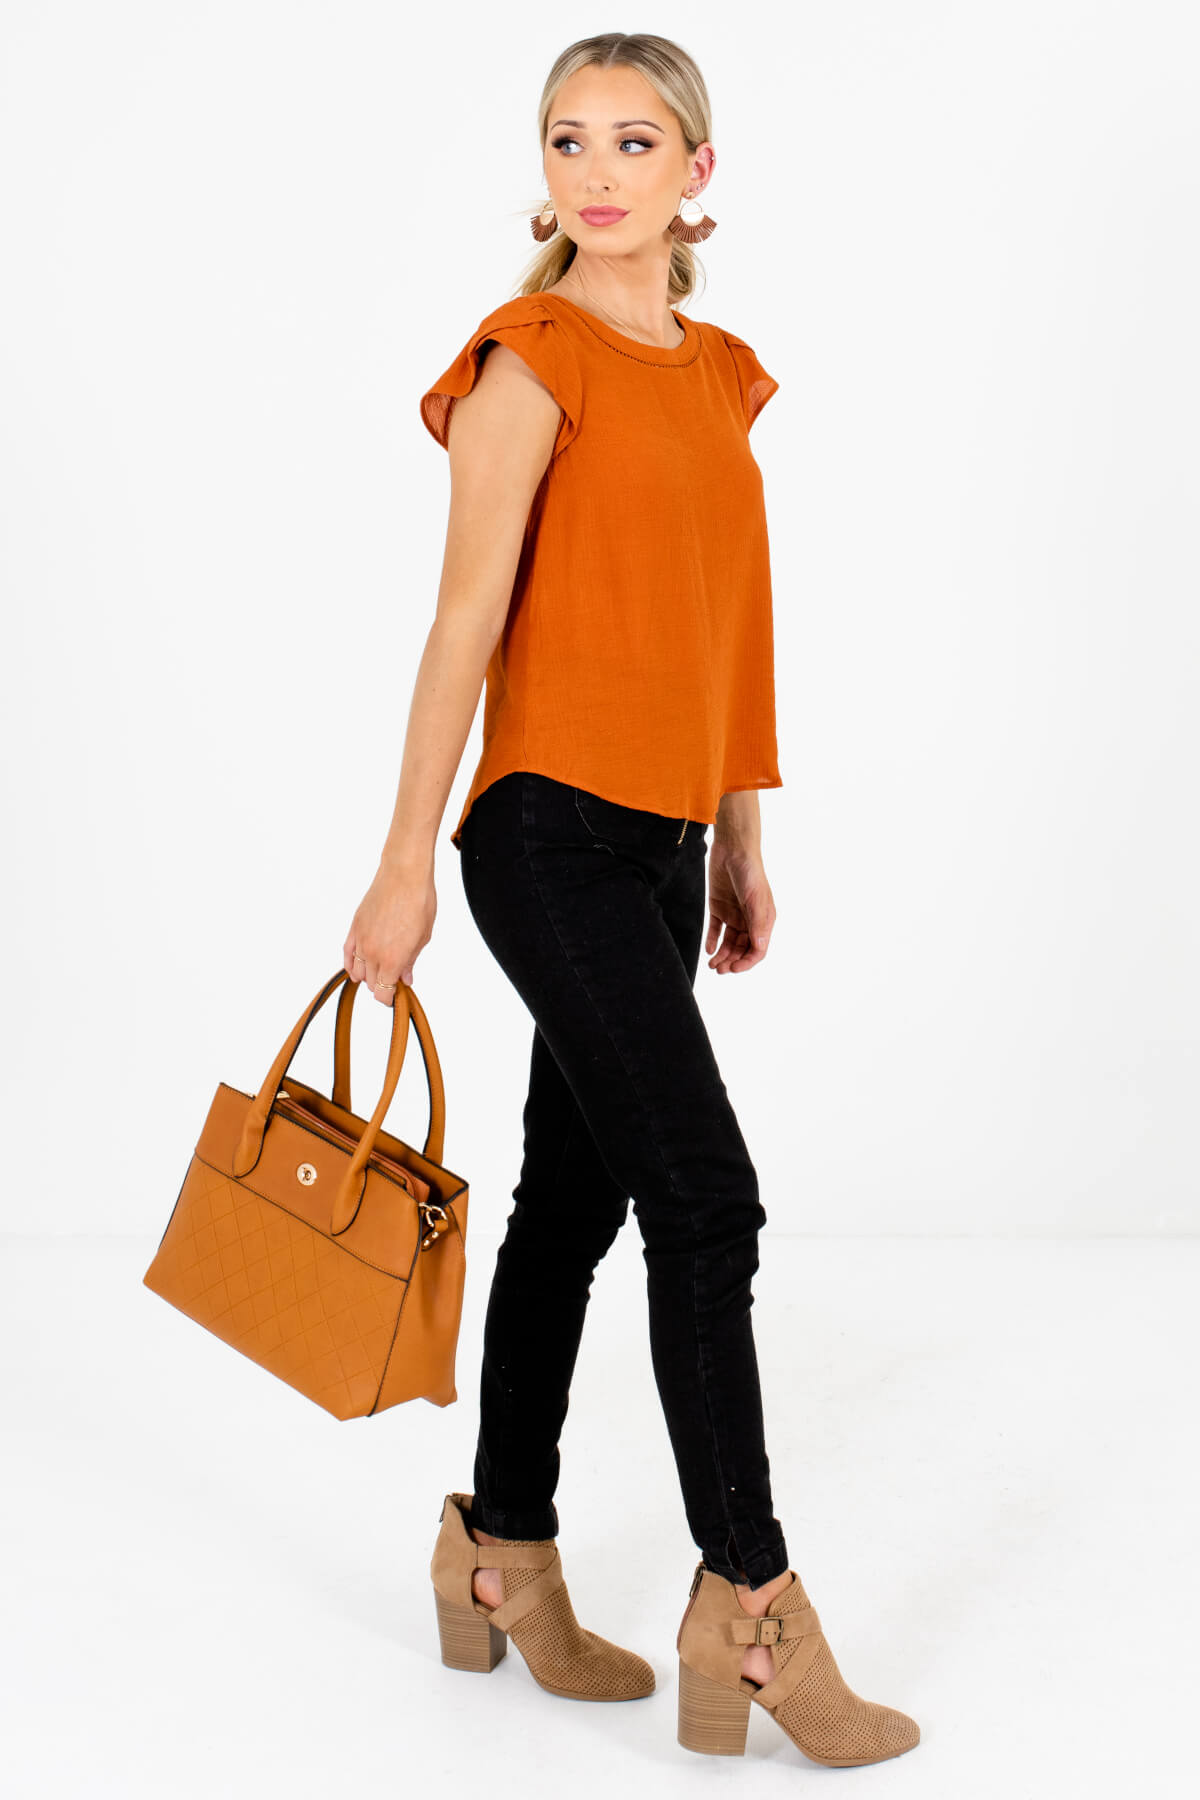 Burnt Orange Cute and Comfortable Boutique Blouses for Women